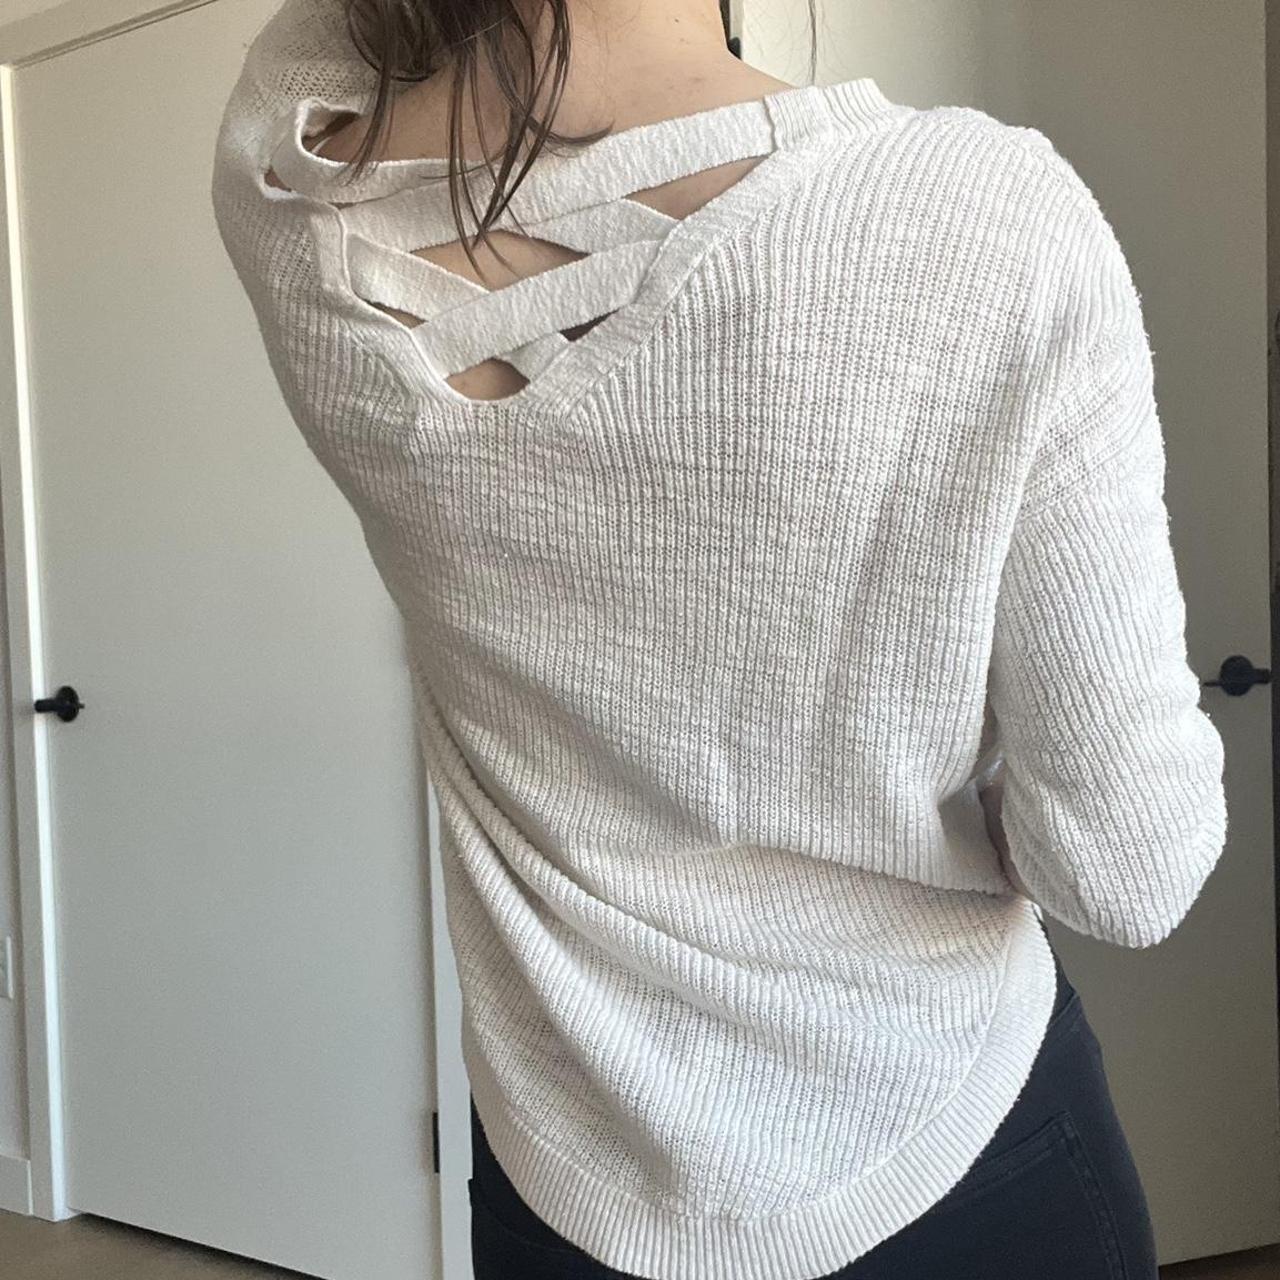 Product Image 2 - Express cream colored sweater with